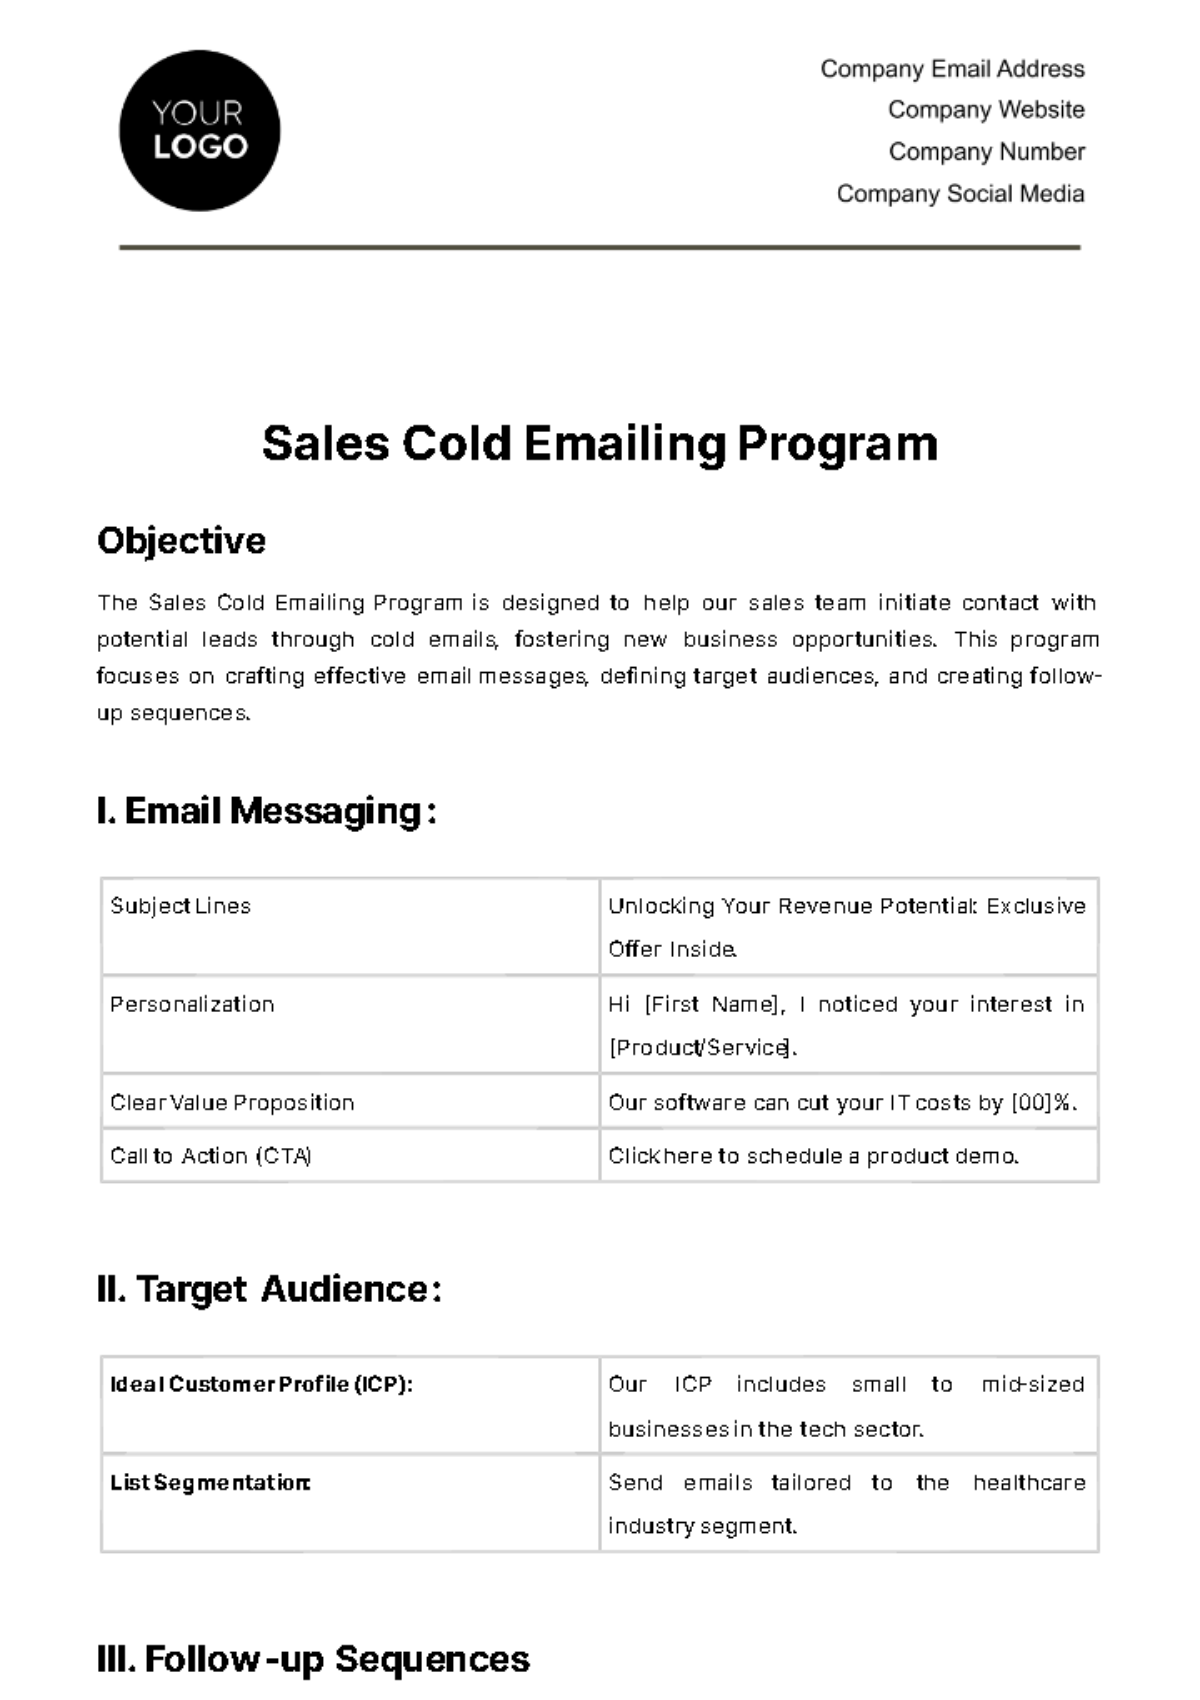 Free Sales Cold Emailing Program Template